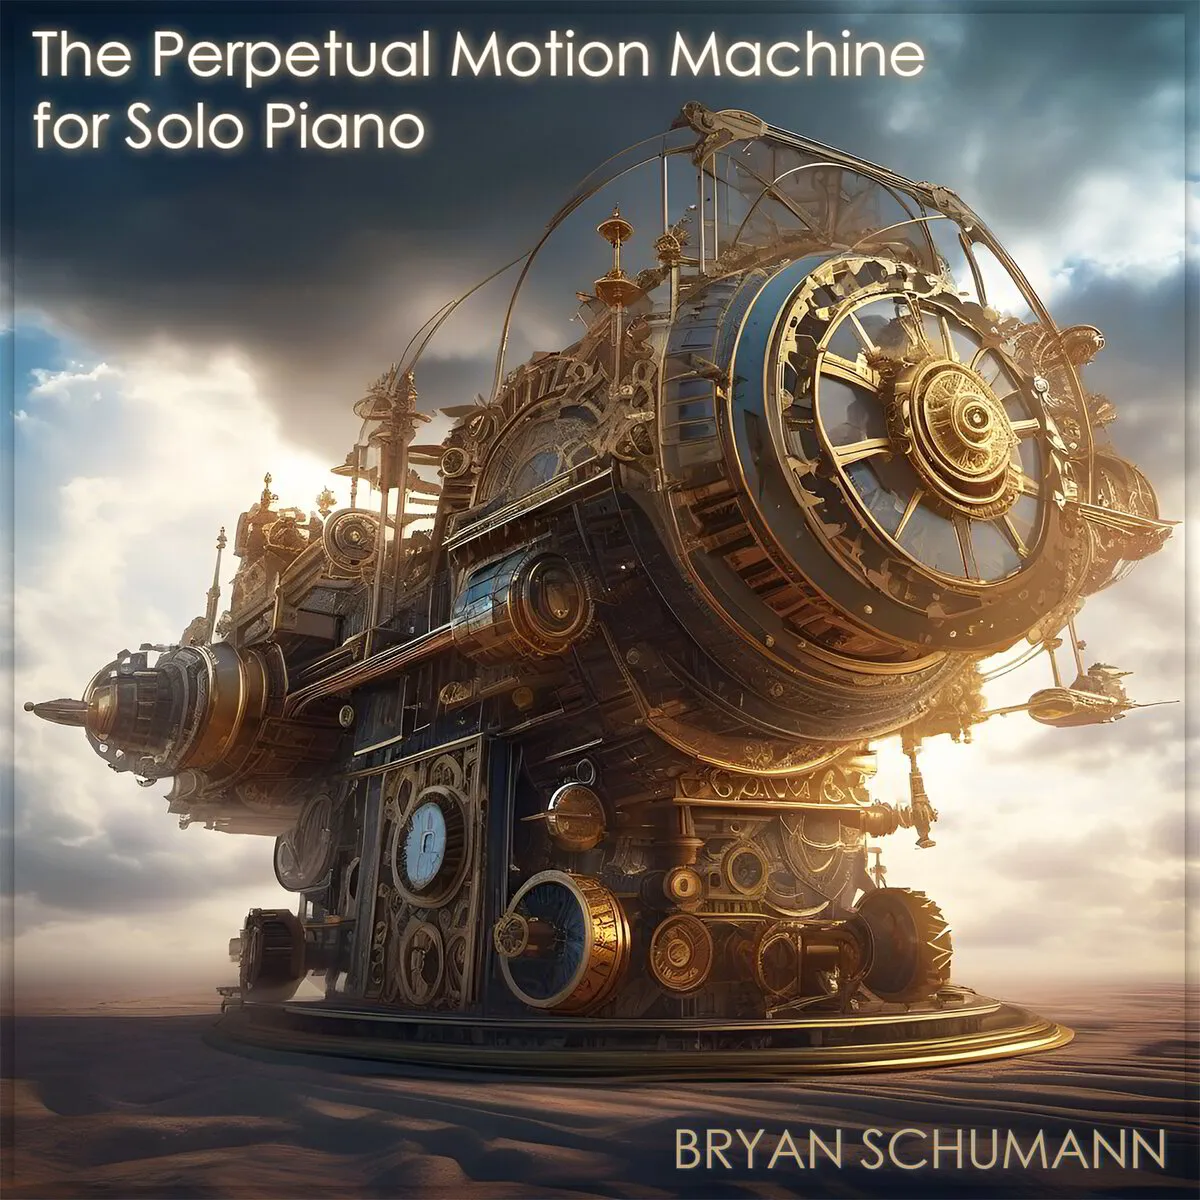 The Perpetual Motion Machine for Solo Piano (audio download)